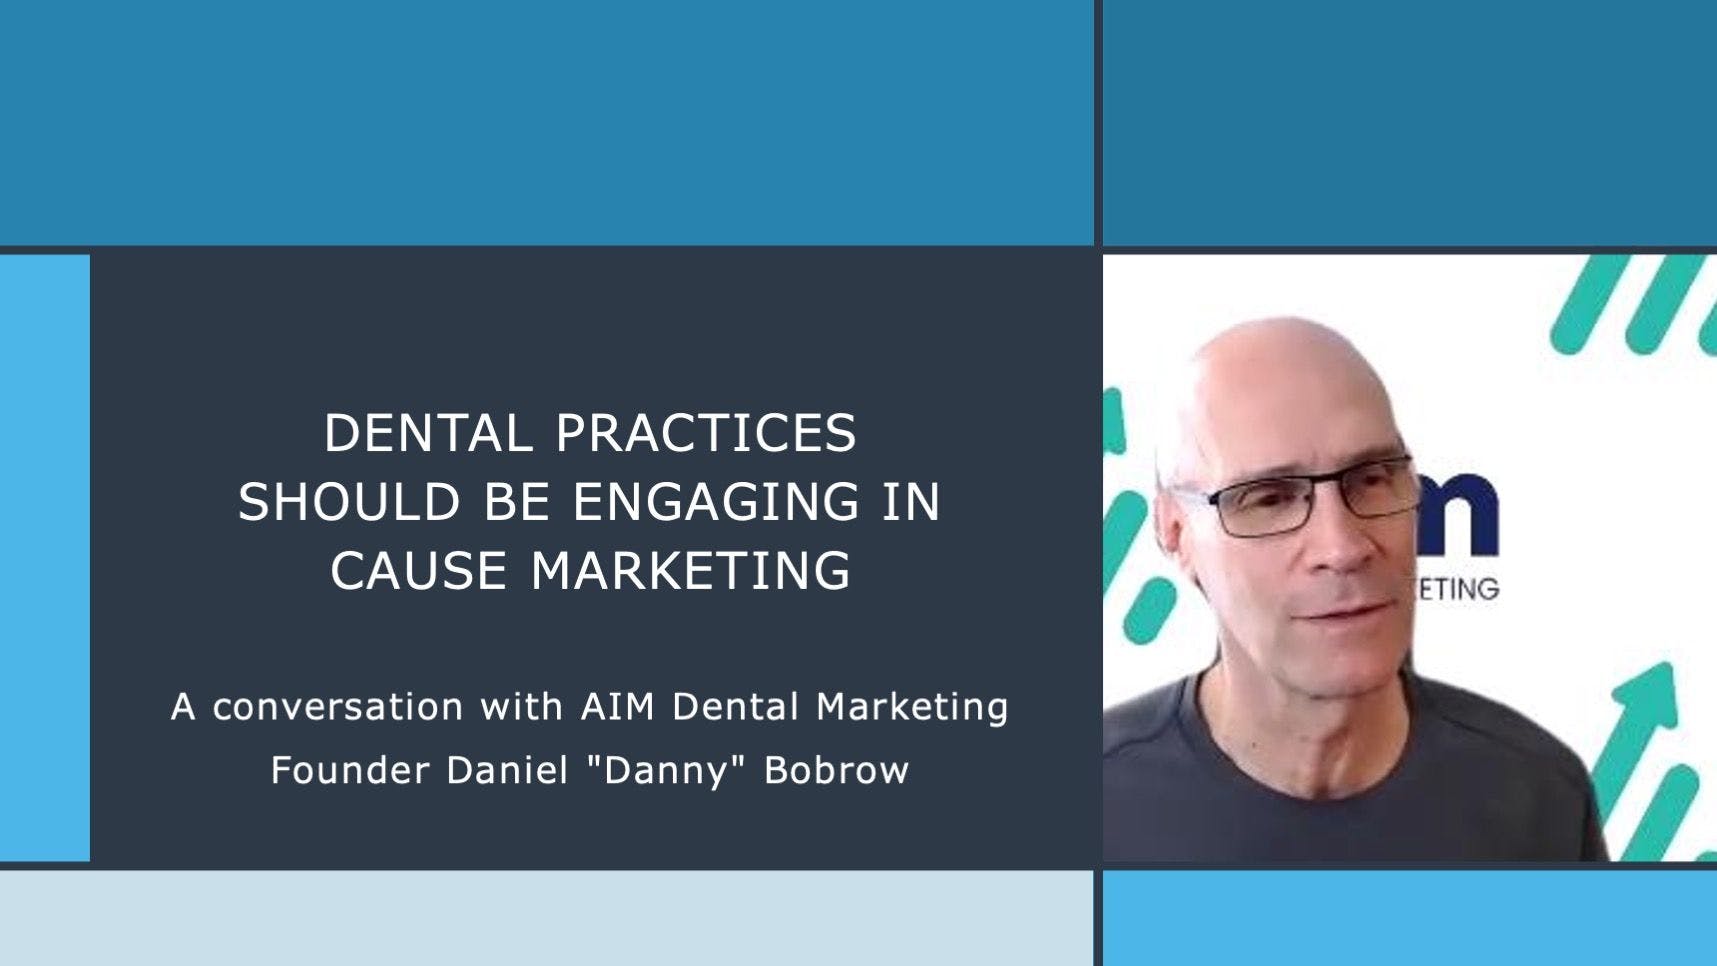 Dental Practices Should be Engaging in Cause Marketing: A conversation with AIM Dental Marketing Founder Daniel "Danny" Bobrow